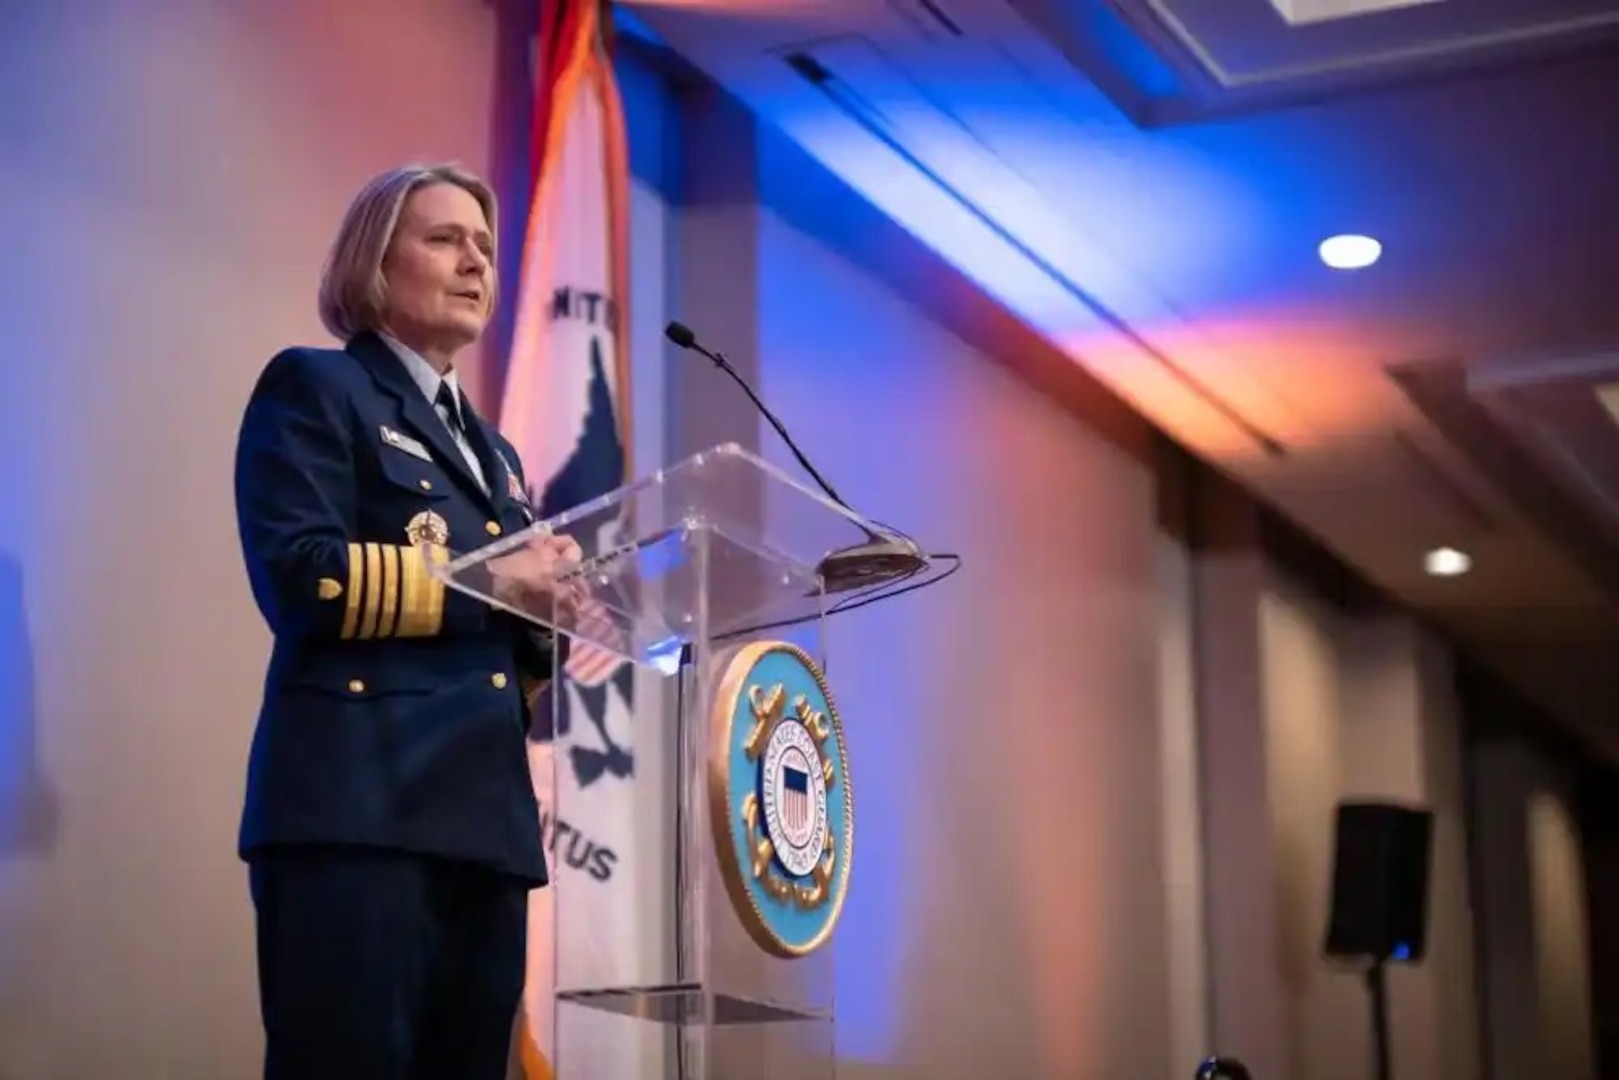 Admiral Linda L. Fagan, Commandant of the Coast Guard, speaks to guests during the 2023 State of the Coast Guard Address in Washington, D.C., Mar. 7, 2023. The State of the Coast Guard Address speaks to the vision for the service. (U. S. Coast Guard photo by Petty Officer 1st Class Brandon Giles)